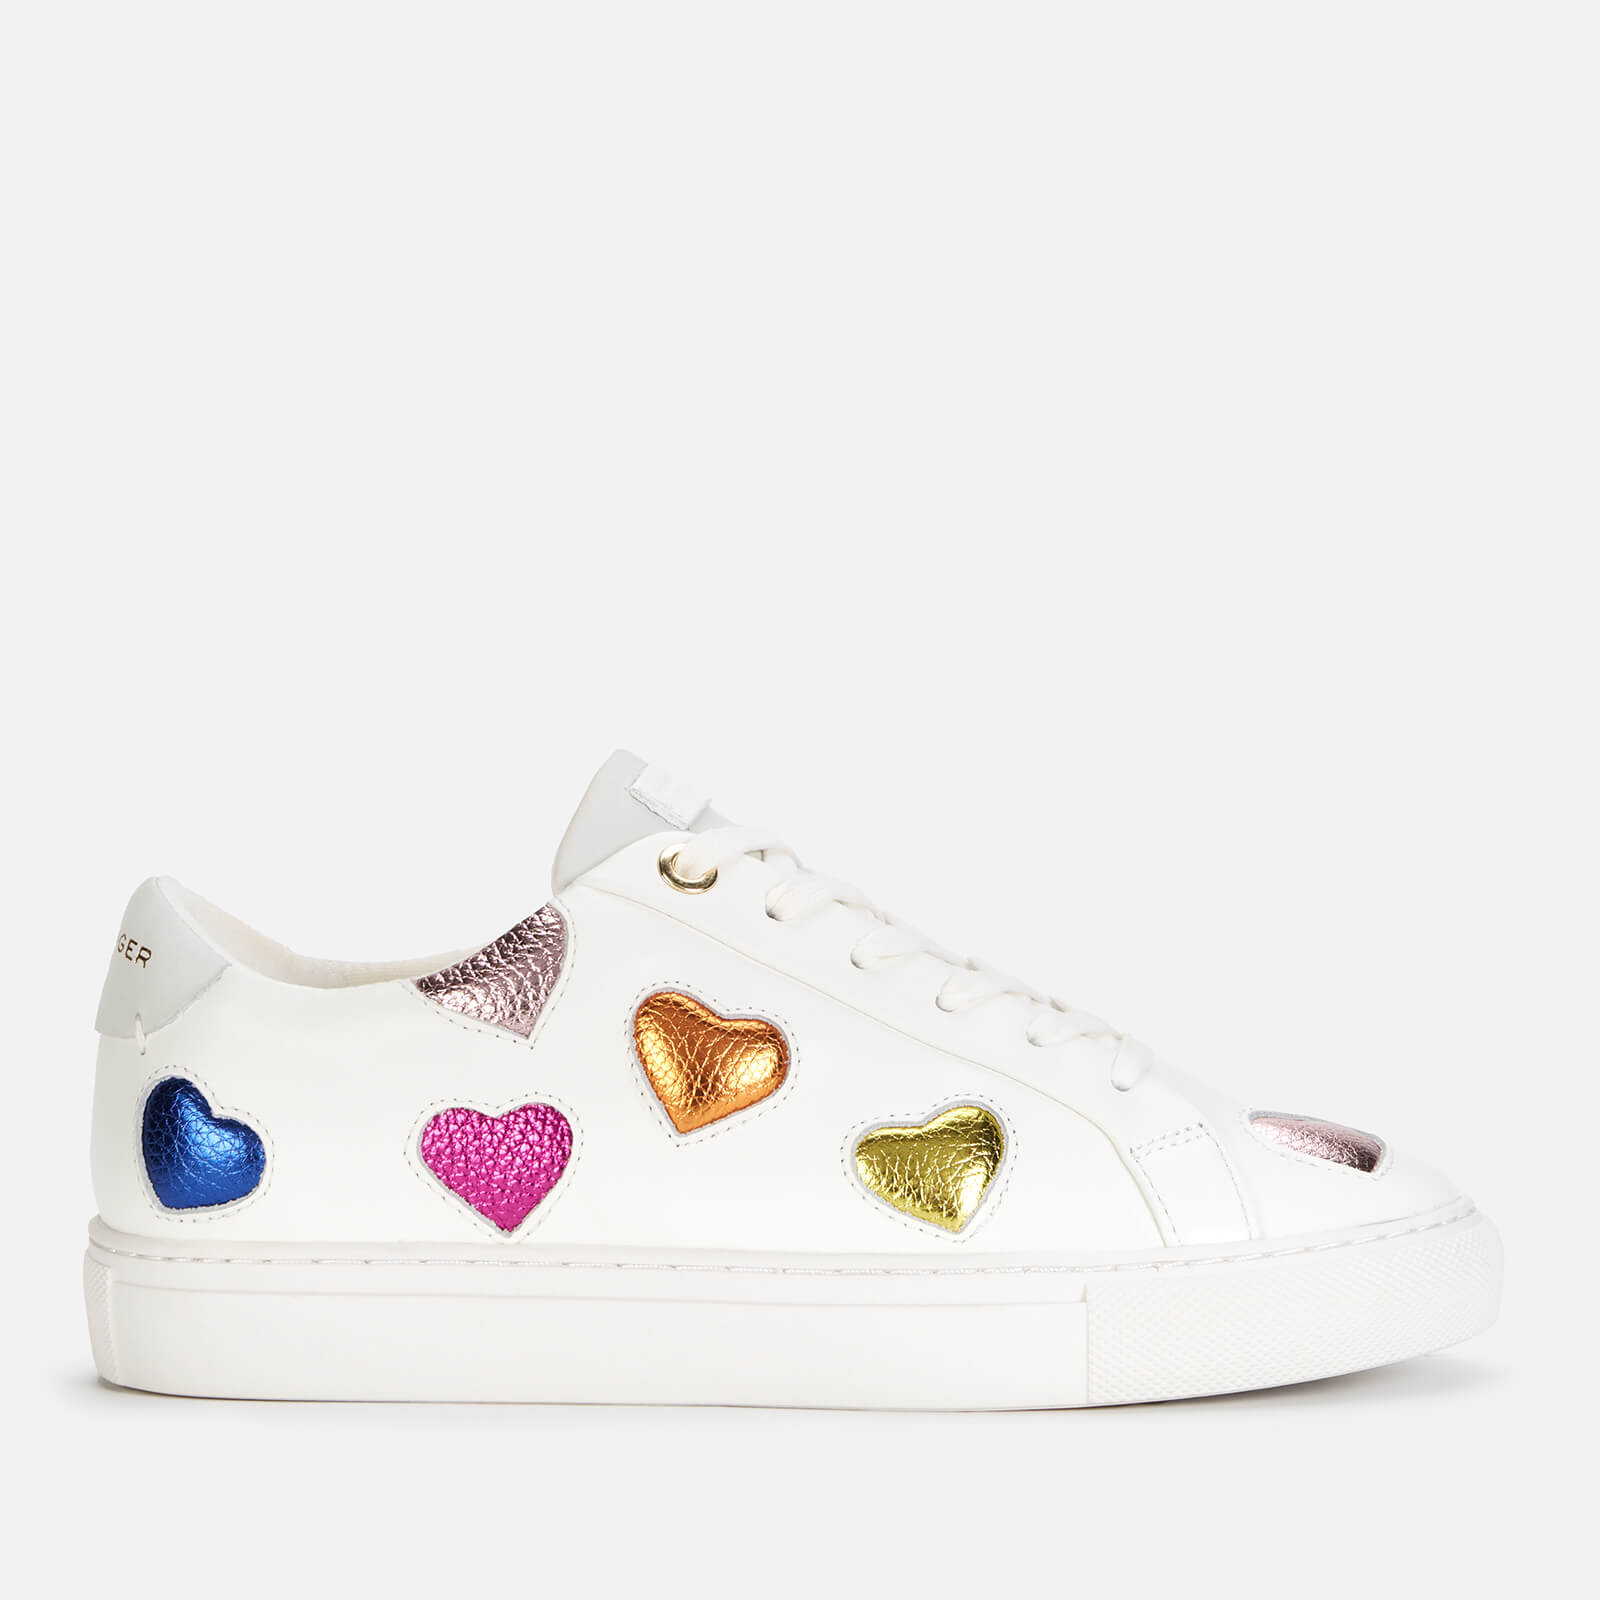 Kurt Geiger London Women’s Laney Love Leather Cupsole Trainers - Mult/Other